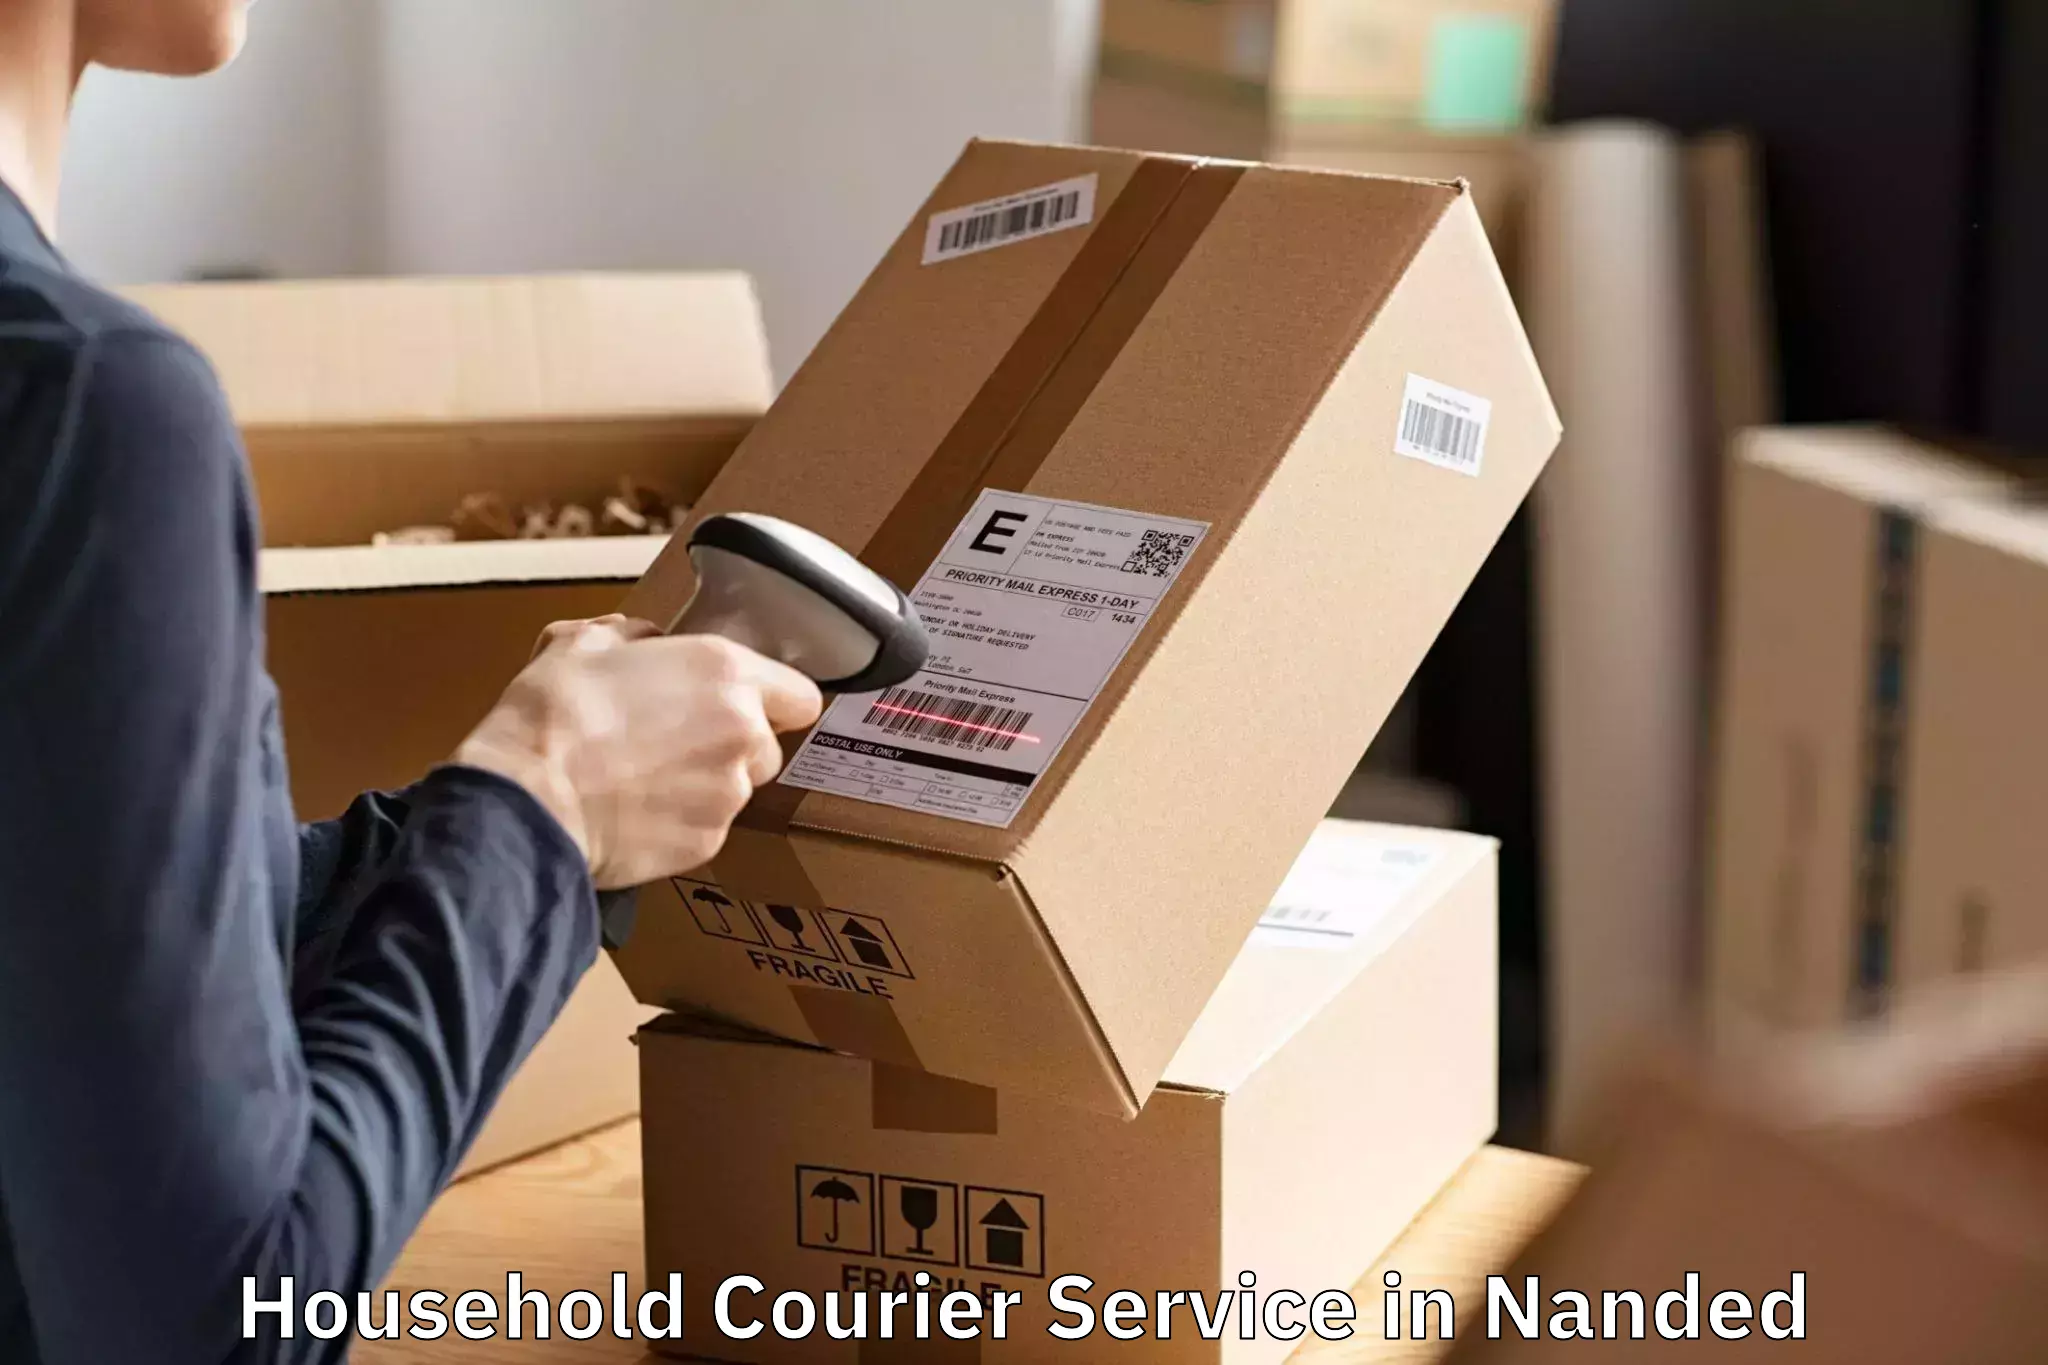 Comprehensive Household Courier Service in Nanded, Maharashtra (MH)